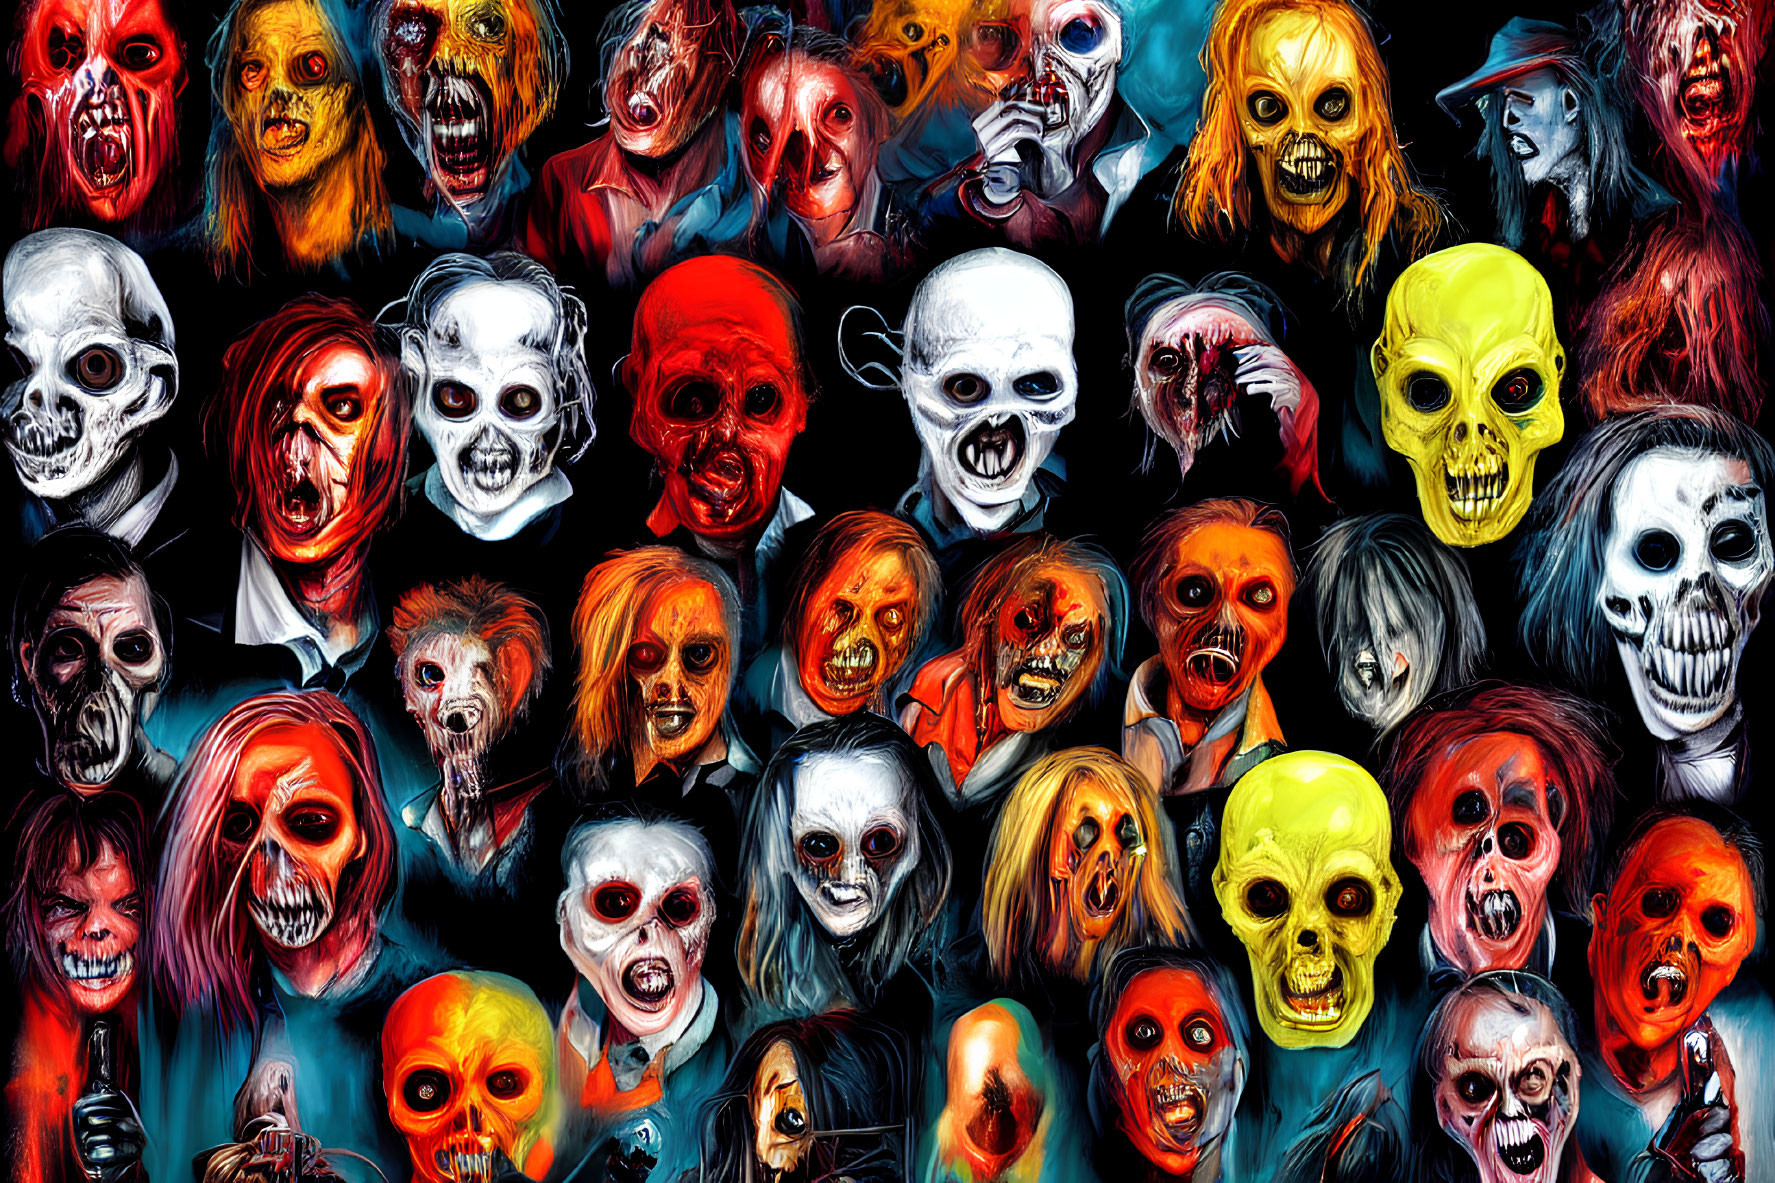 Collage of Horror-Themed Faces with Exaggerated Expressions